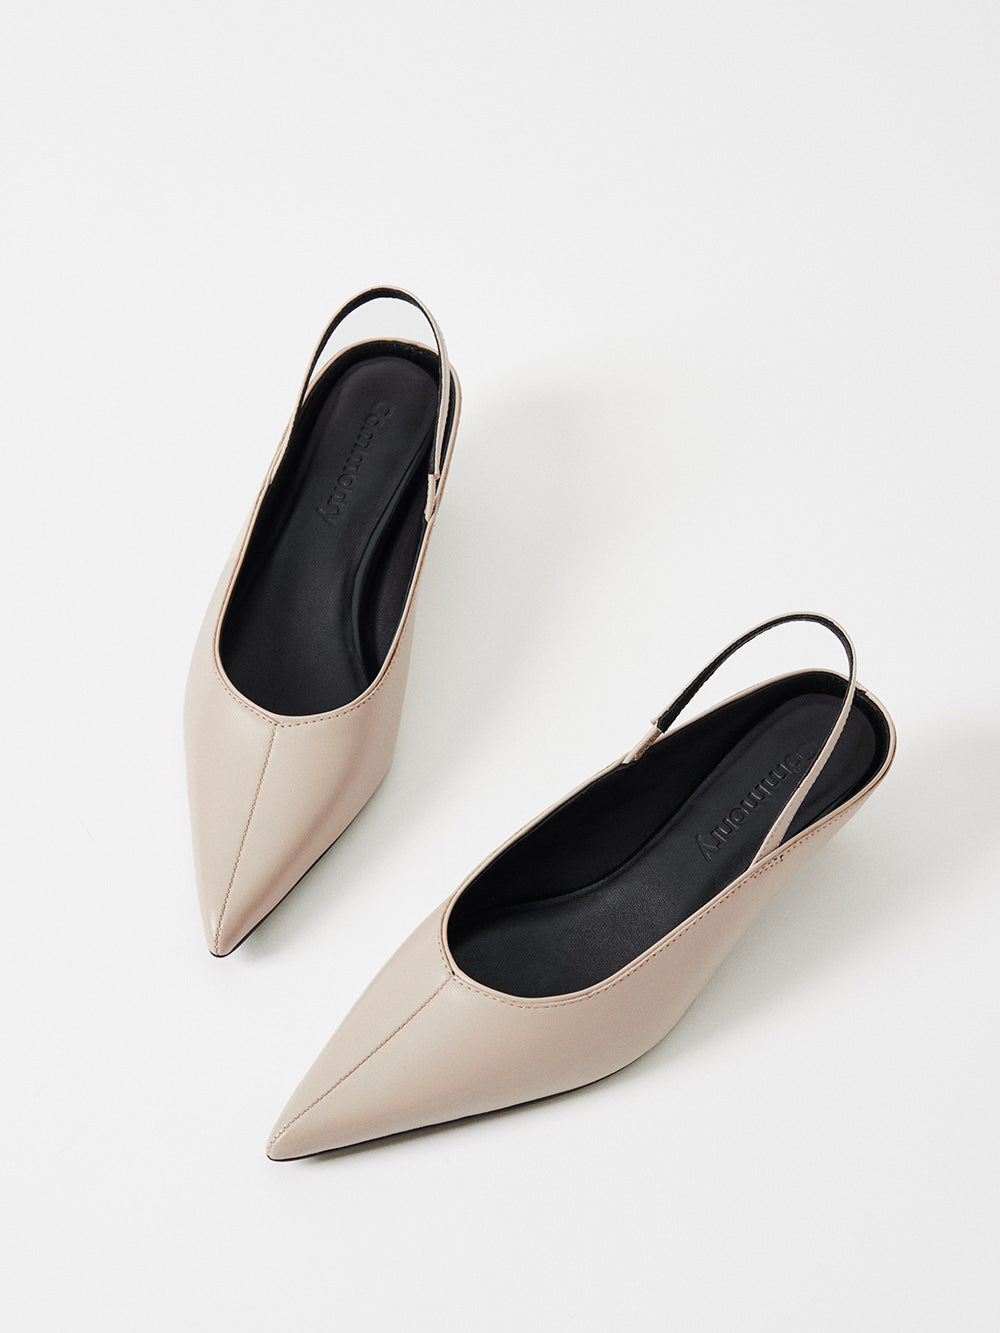 The Scout Leather Slingback